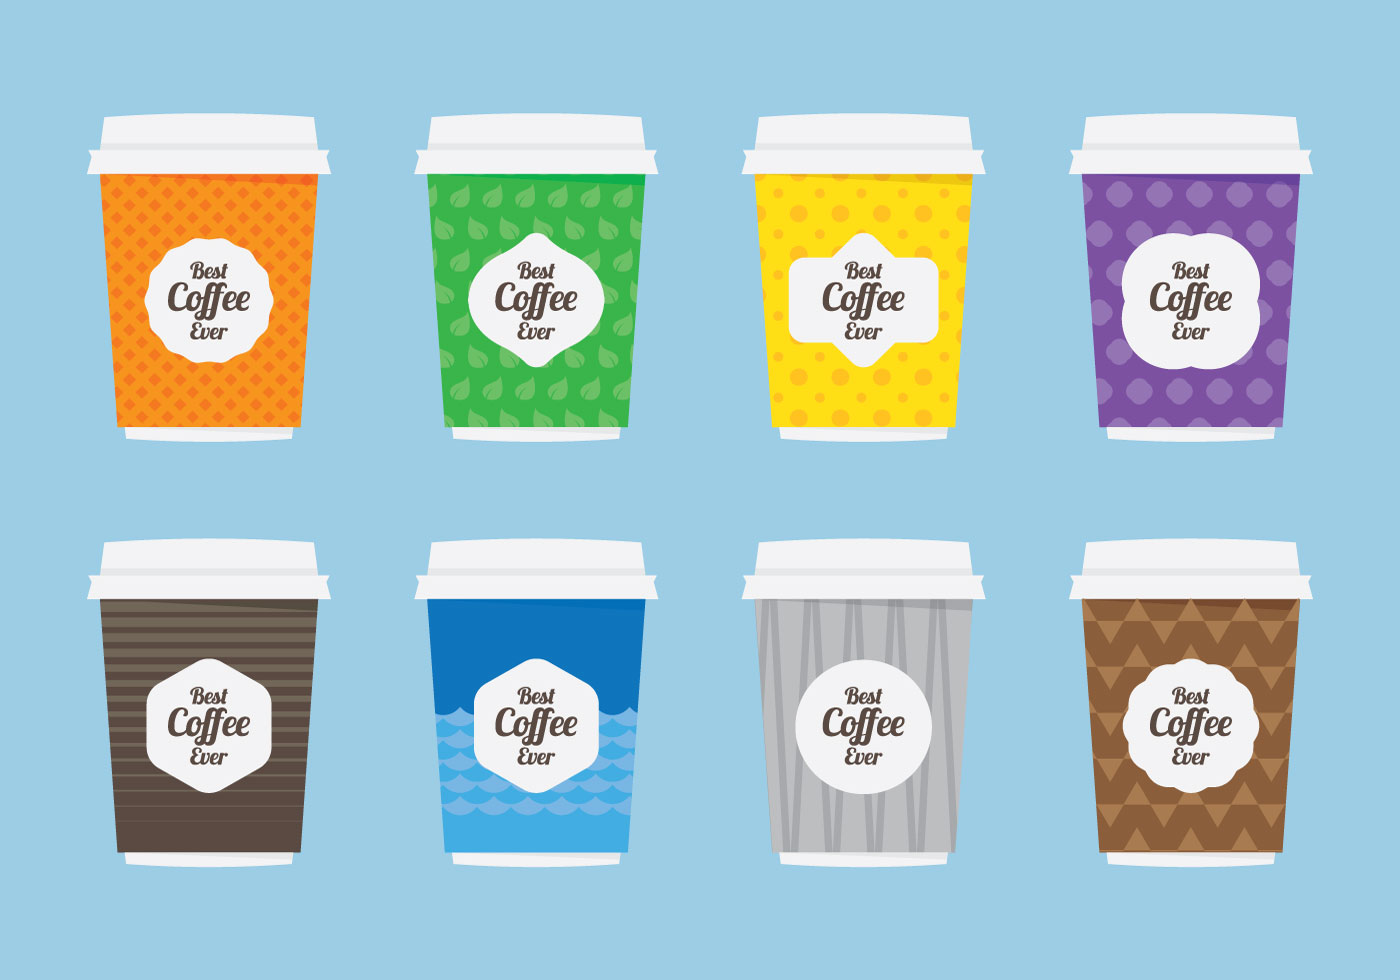 Download Coffee Sleeve Flat Icon 108883 - Download Free Vectors ...